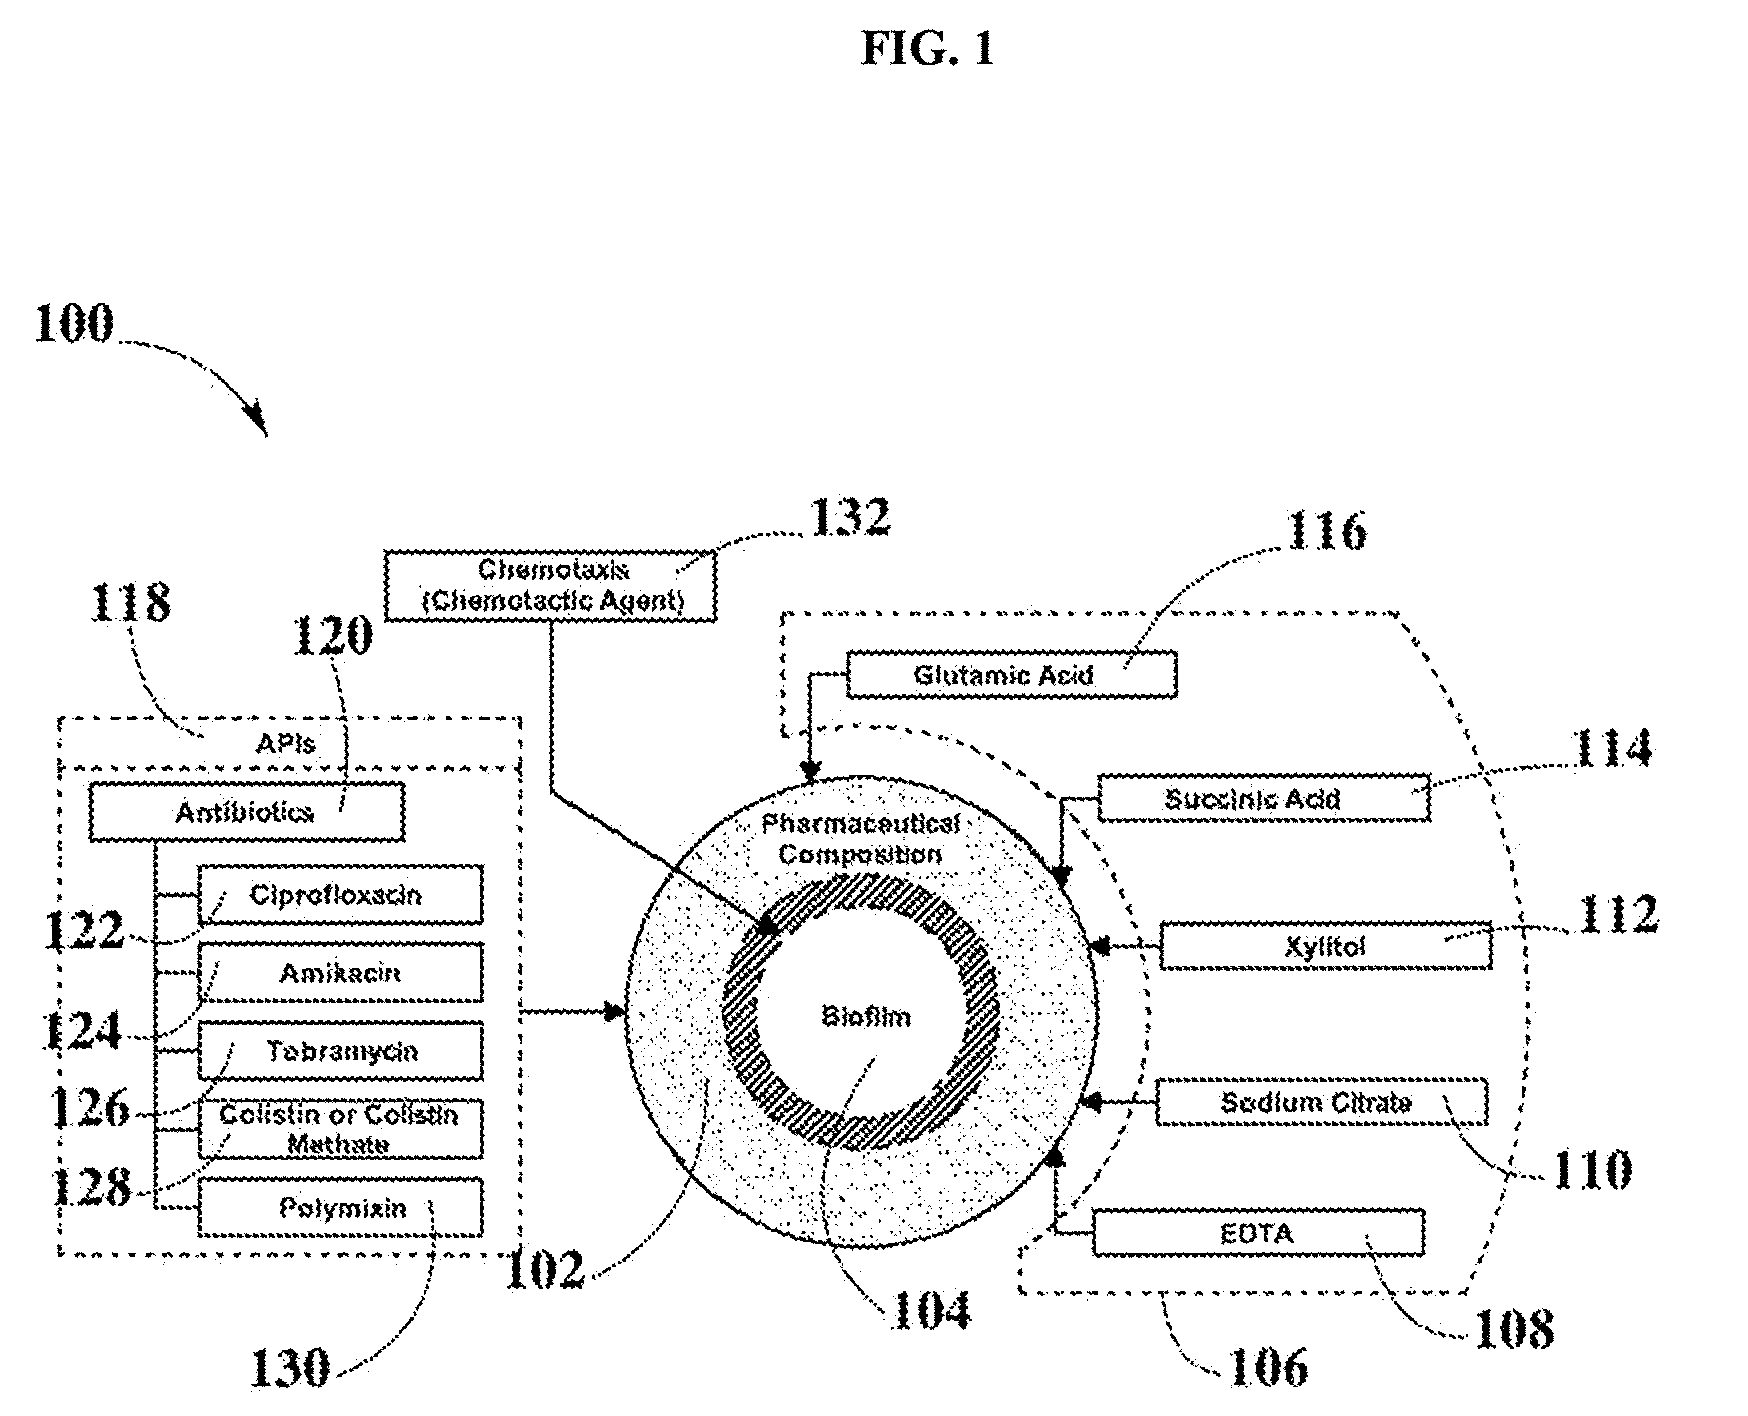 Antibiotic composition comprising a chemotactic agent and a nutrient dispersion